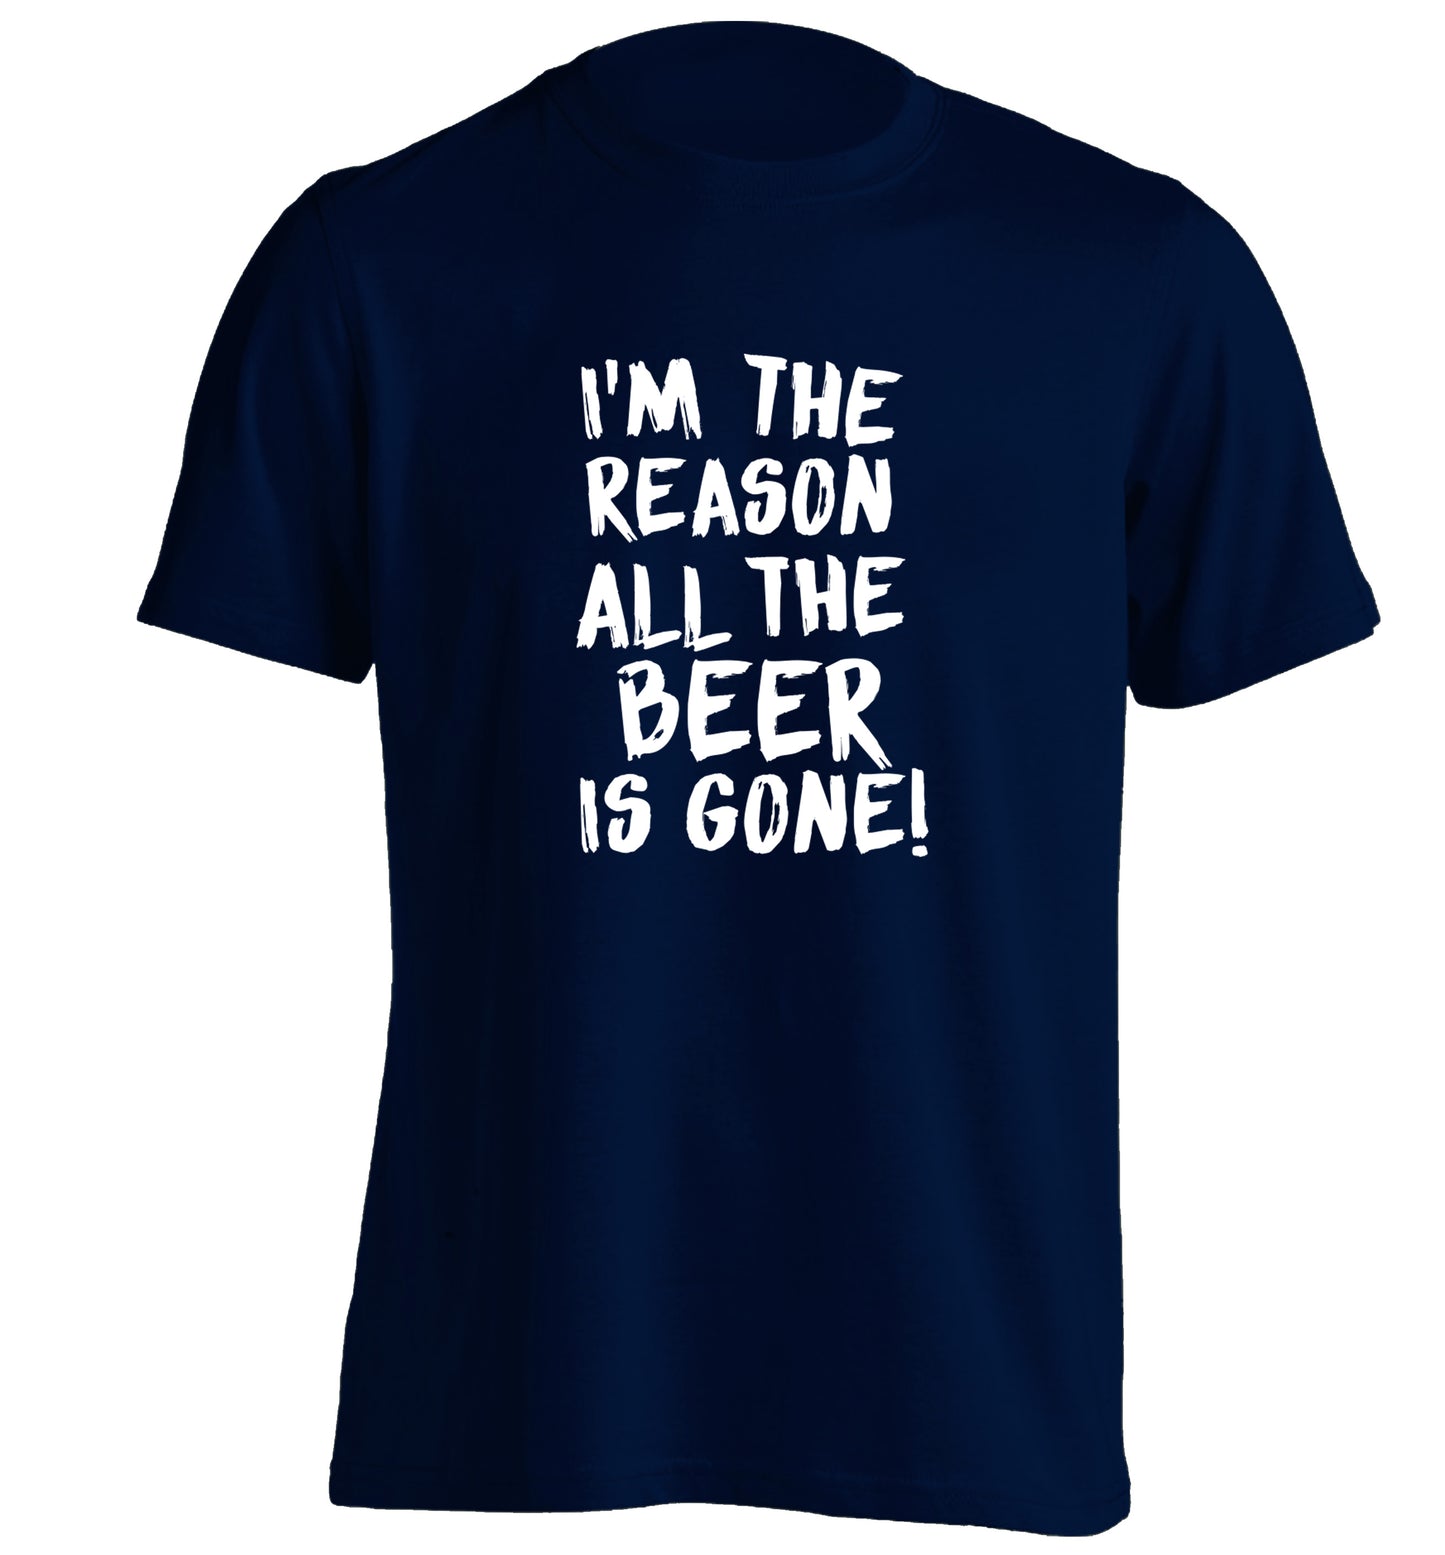 I'm the reason all the beer is gone adults unisex navy Tshirt 2XL